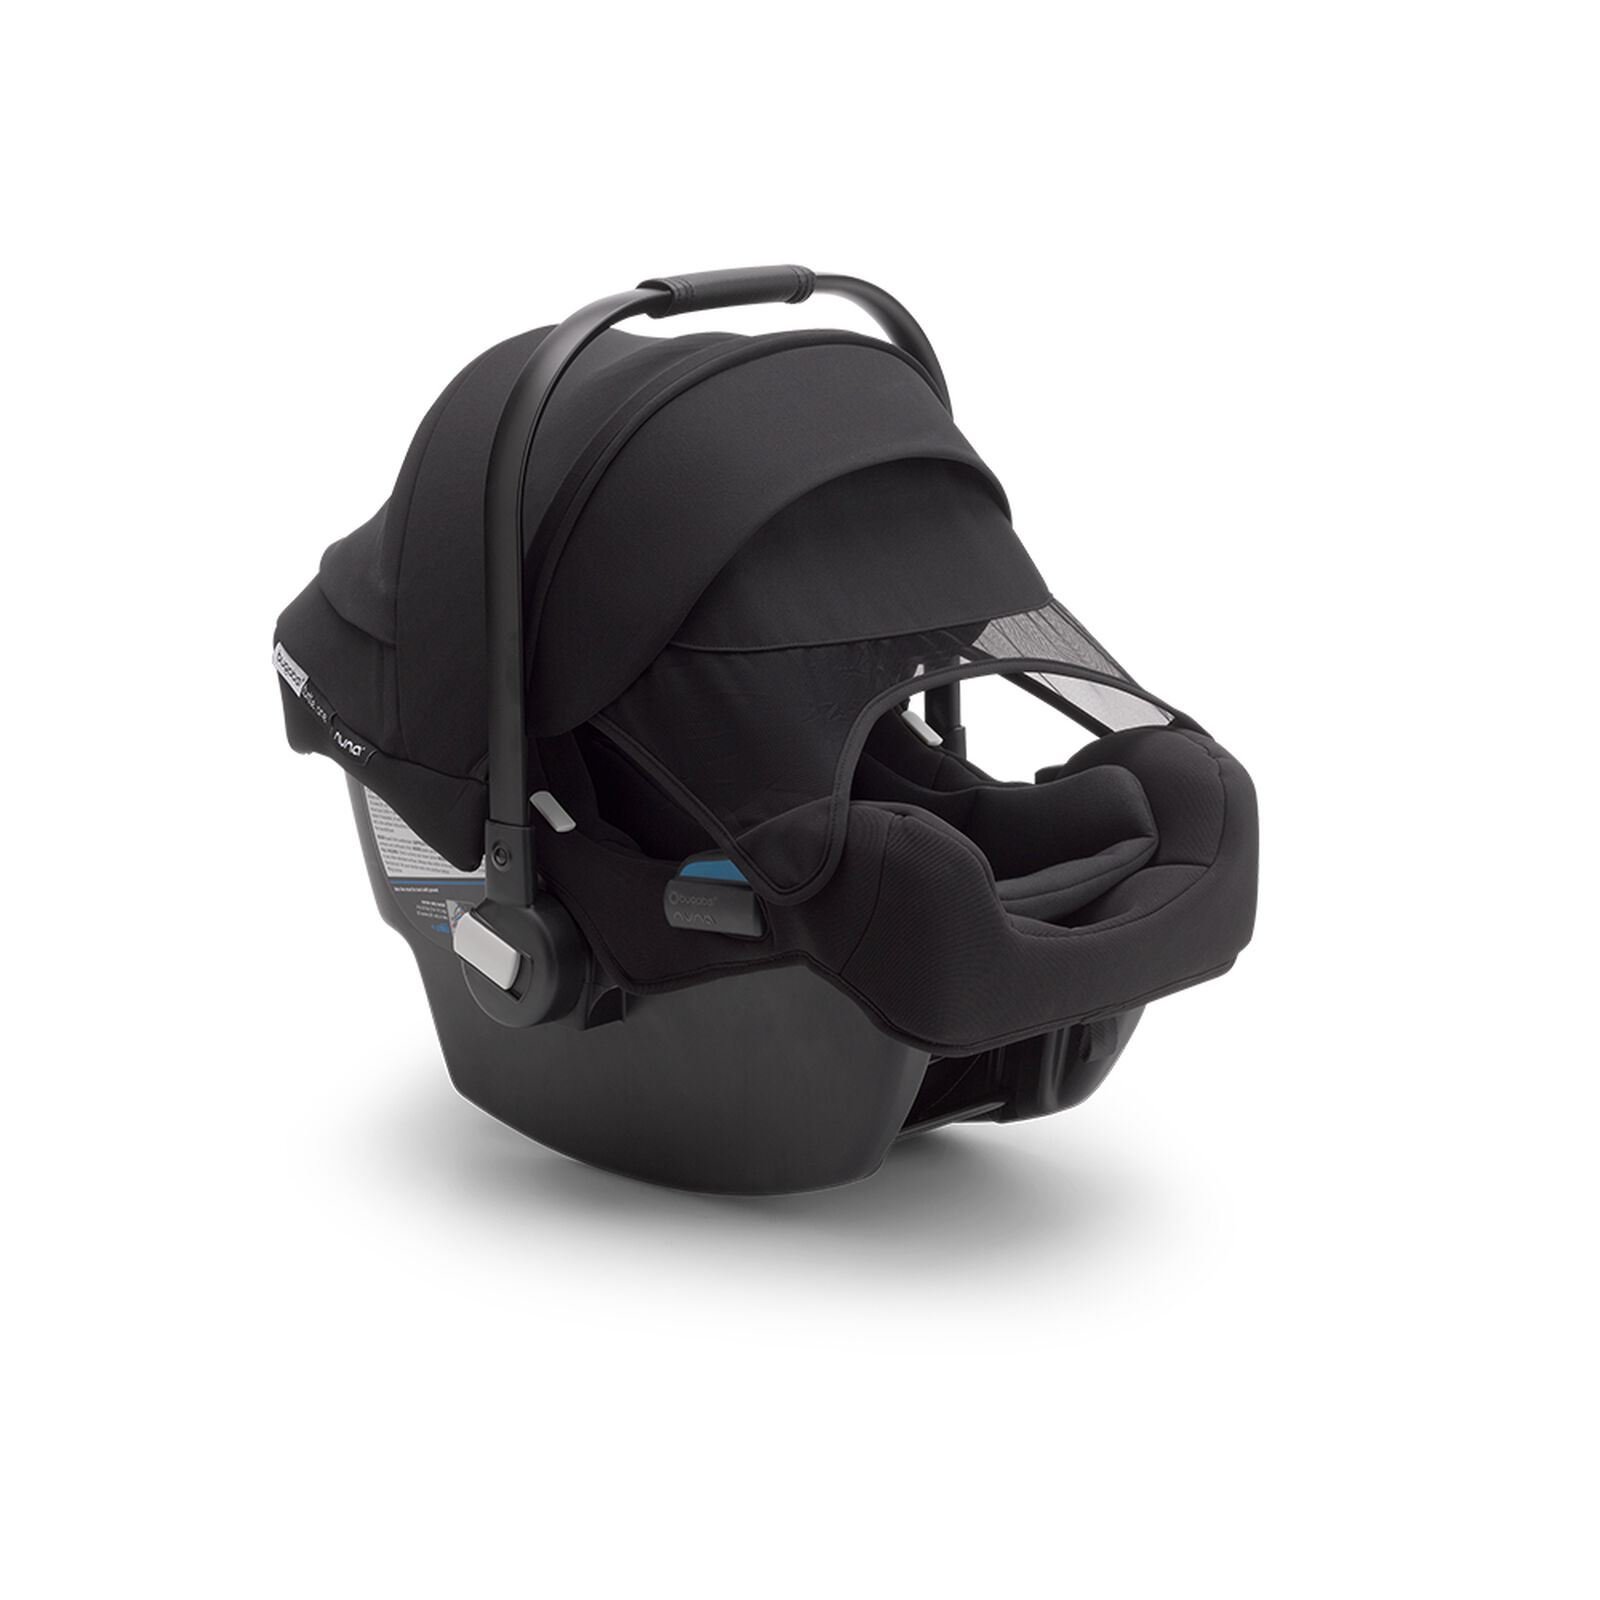 Bugaboo Turtle One by Nuna car seat with base - View 3